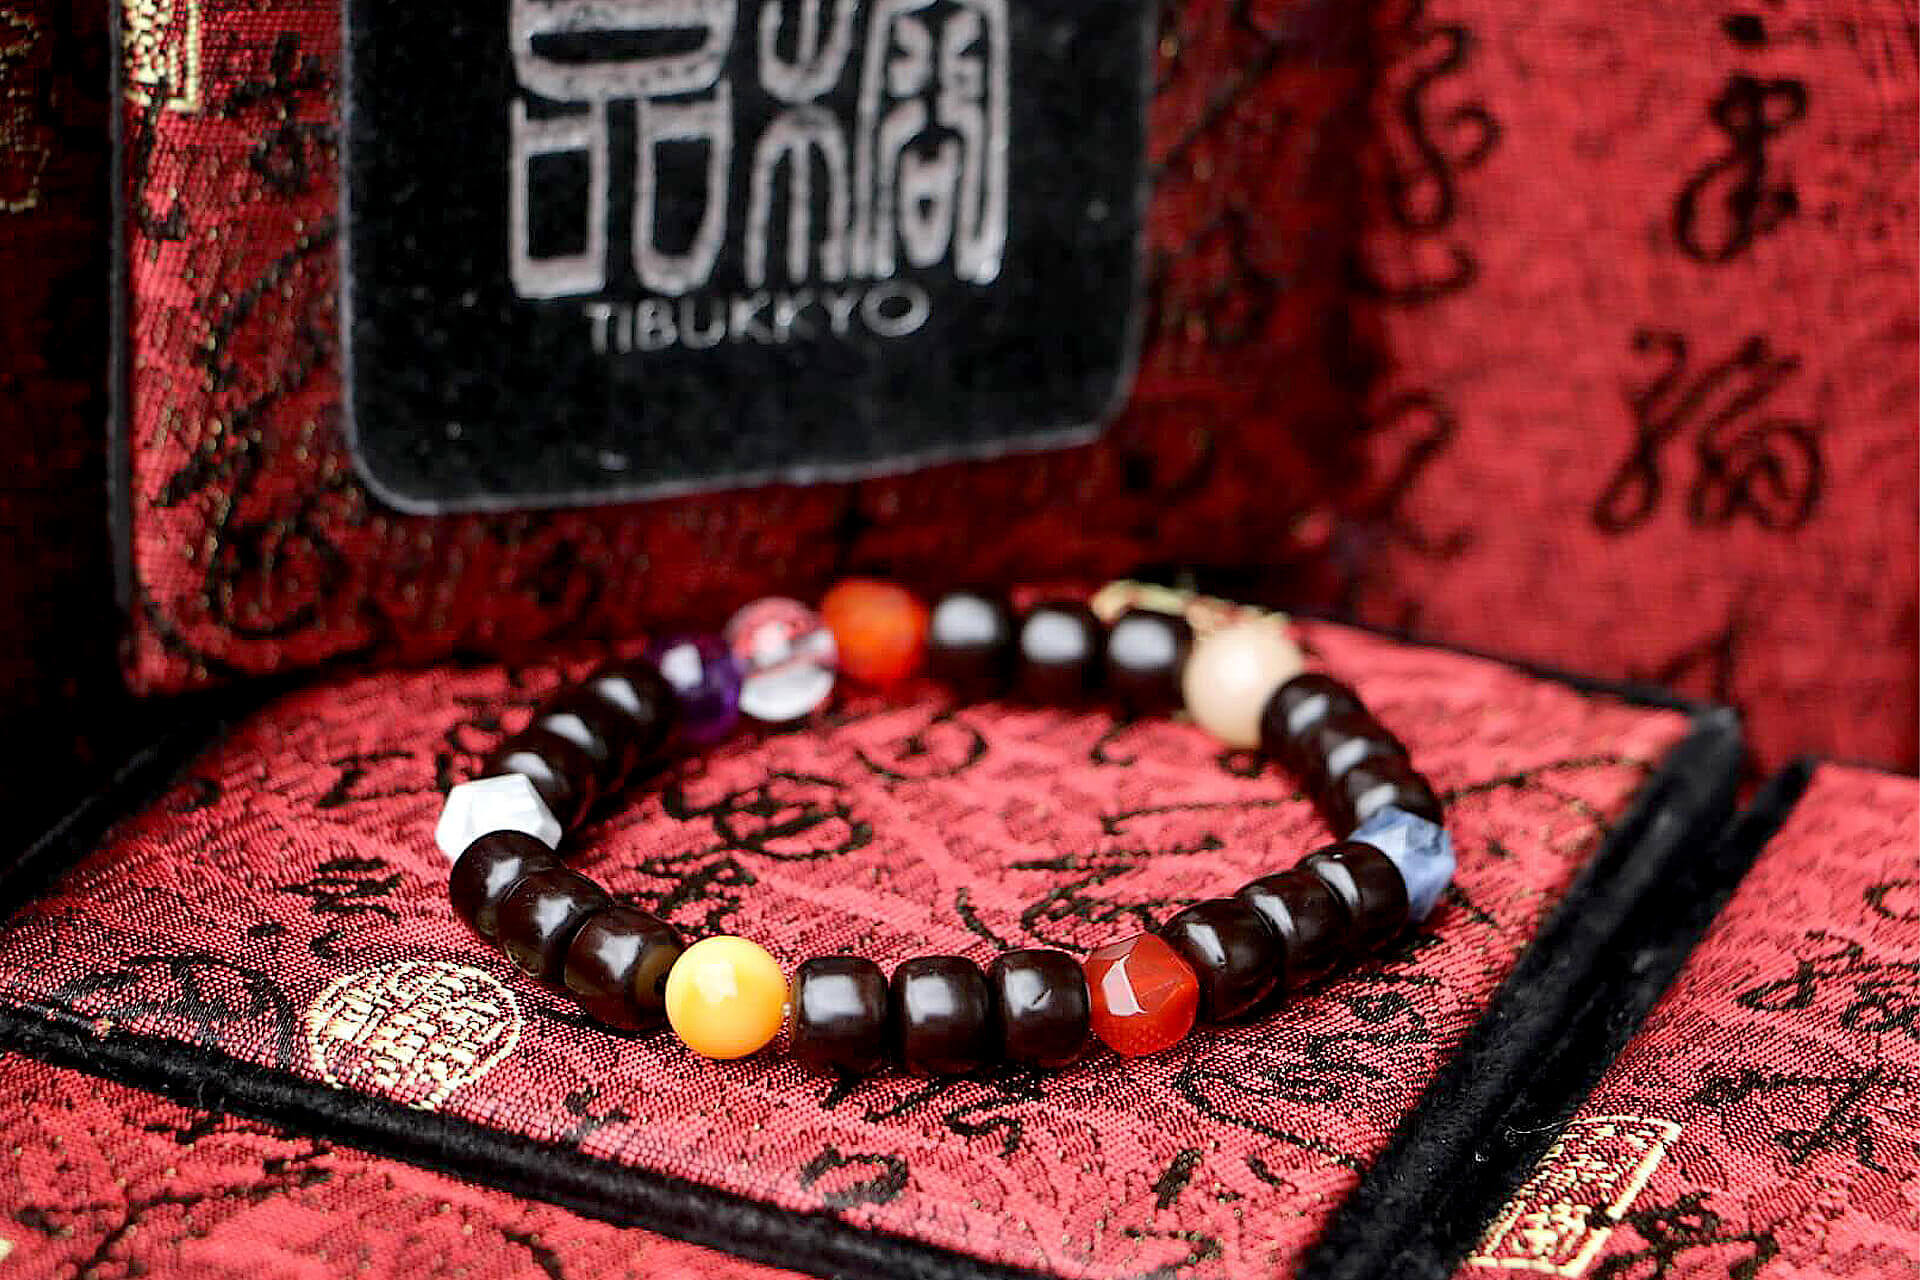 TIBUKKYO Taiwan Derong Collection｜Exquisite Indonesian Coconut Hand Beads 8x6mm Barrel Beads｜Duobao Beads｜Myanmar Topaz Beads｜Multi-cut South Red Agate Beads｜Blue Stone Beads